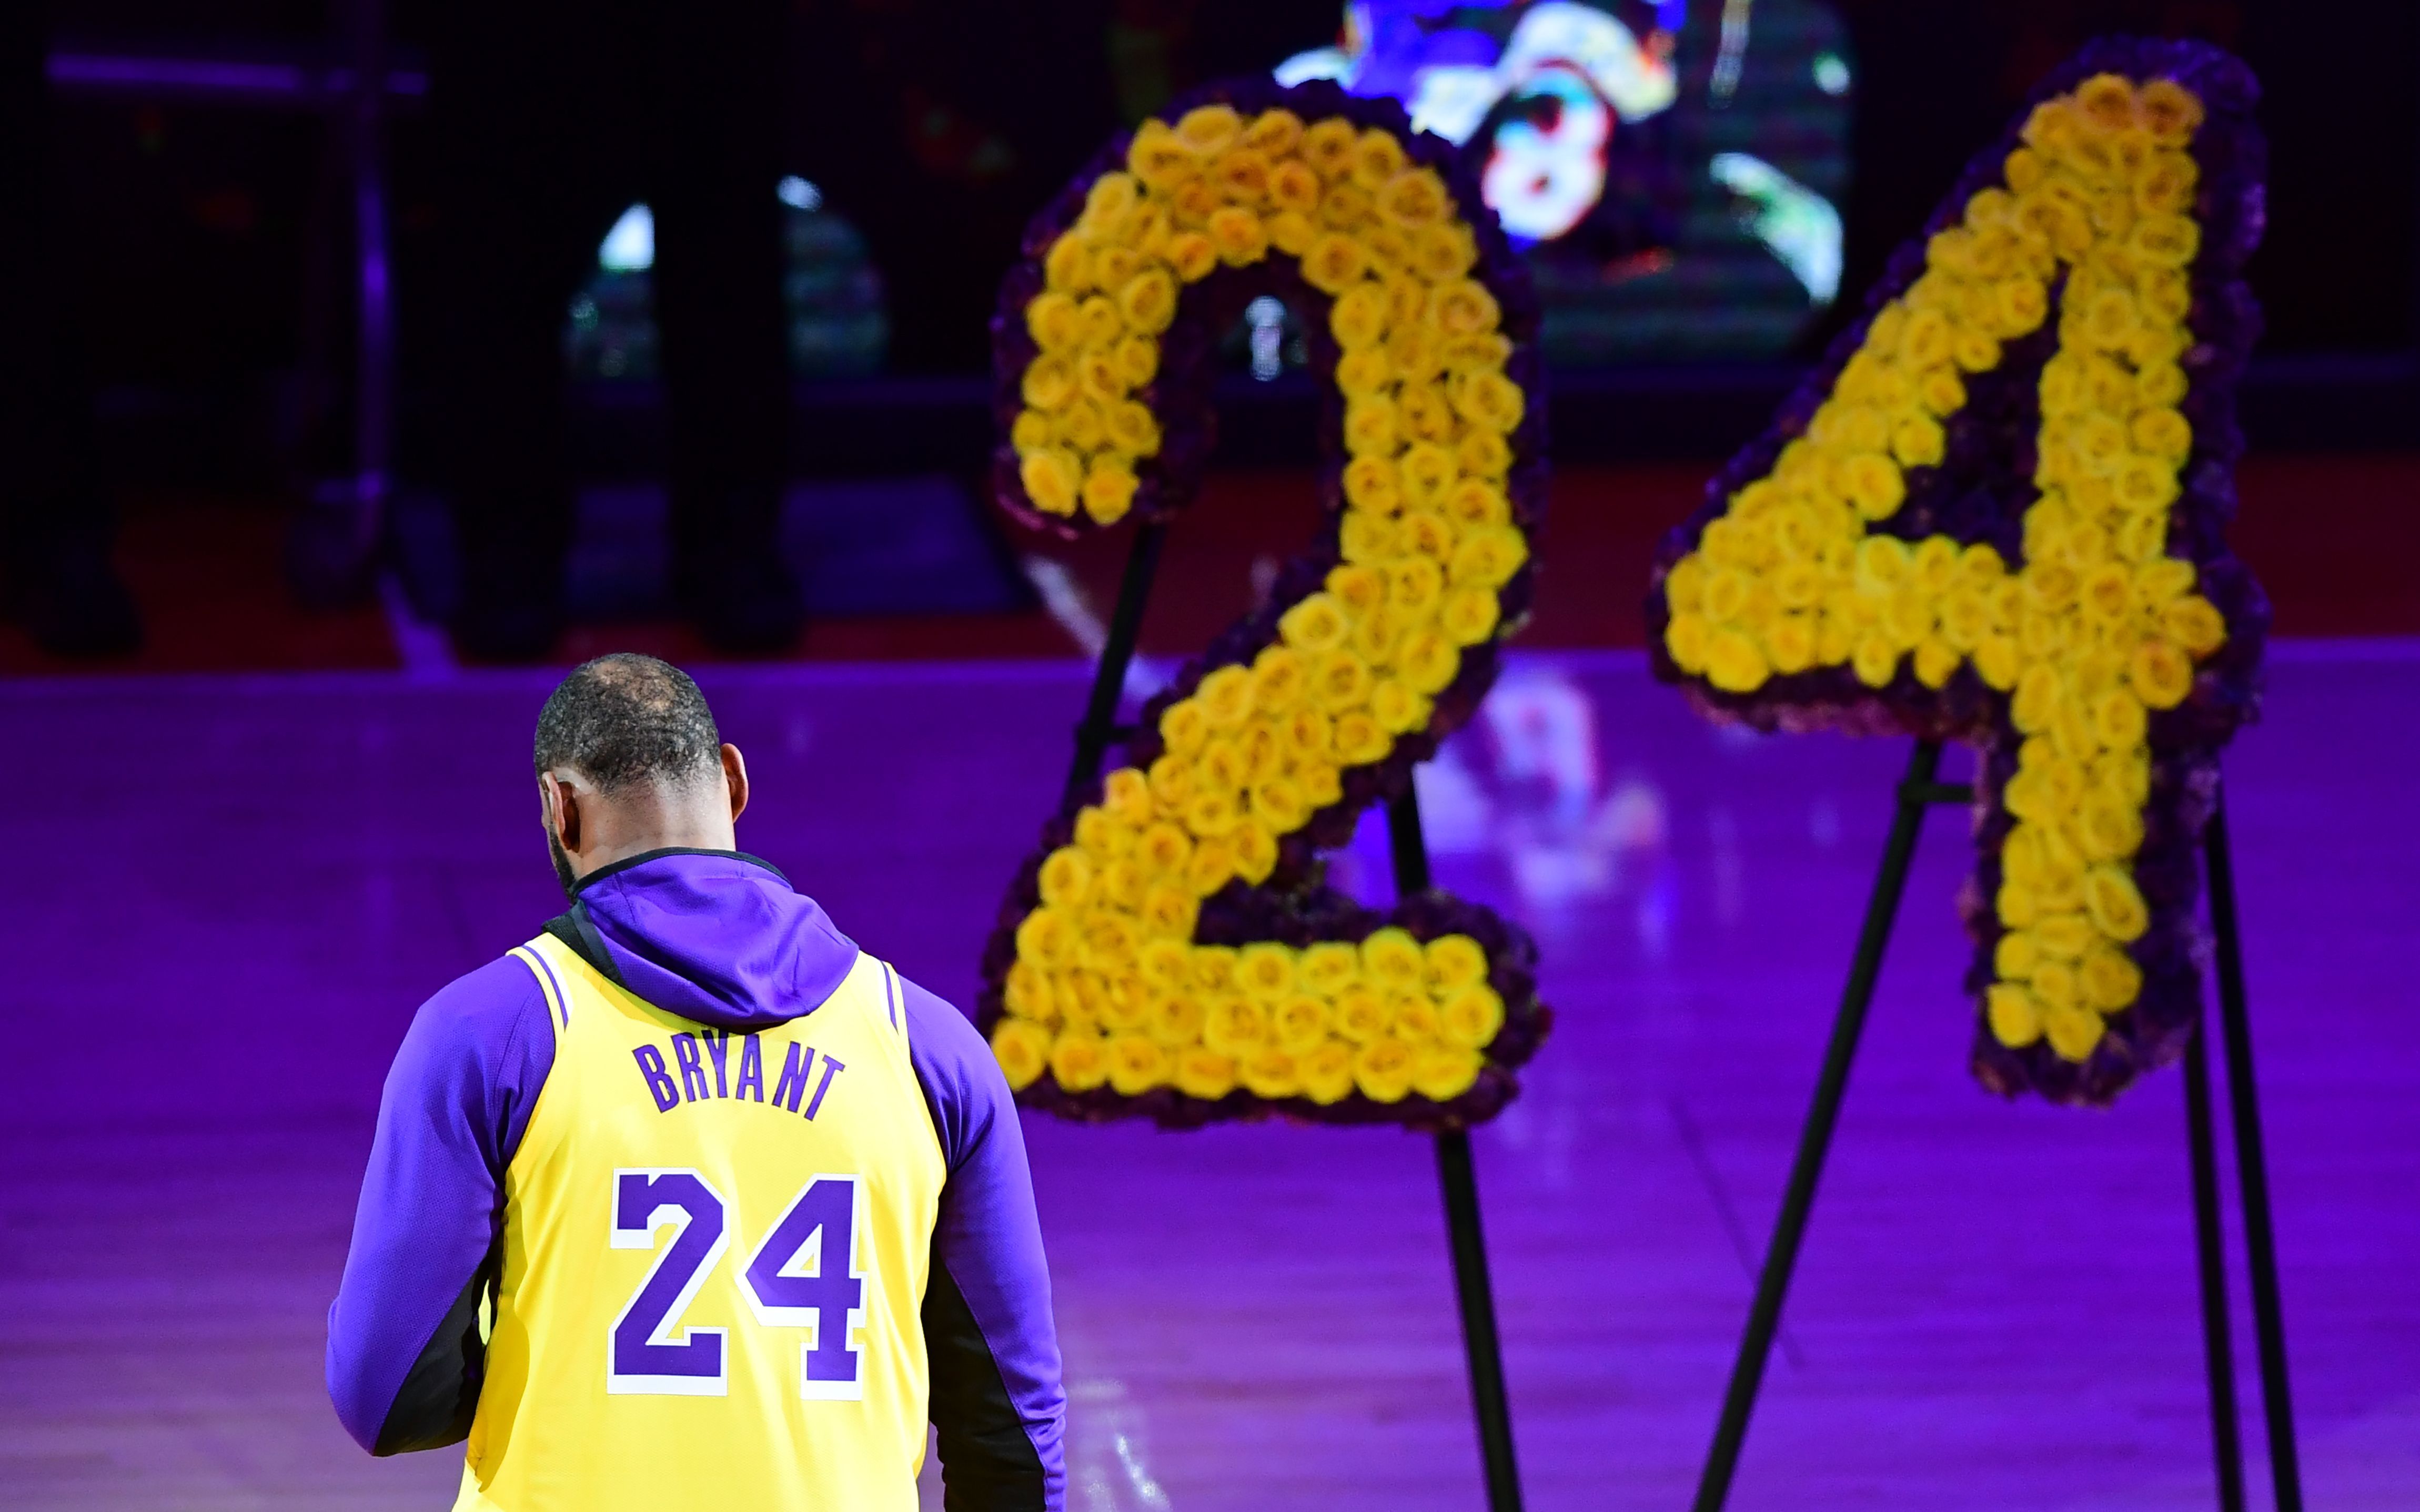 In this image, yellow roses spell out "24" to honor Bryant's jersey letter